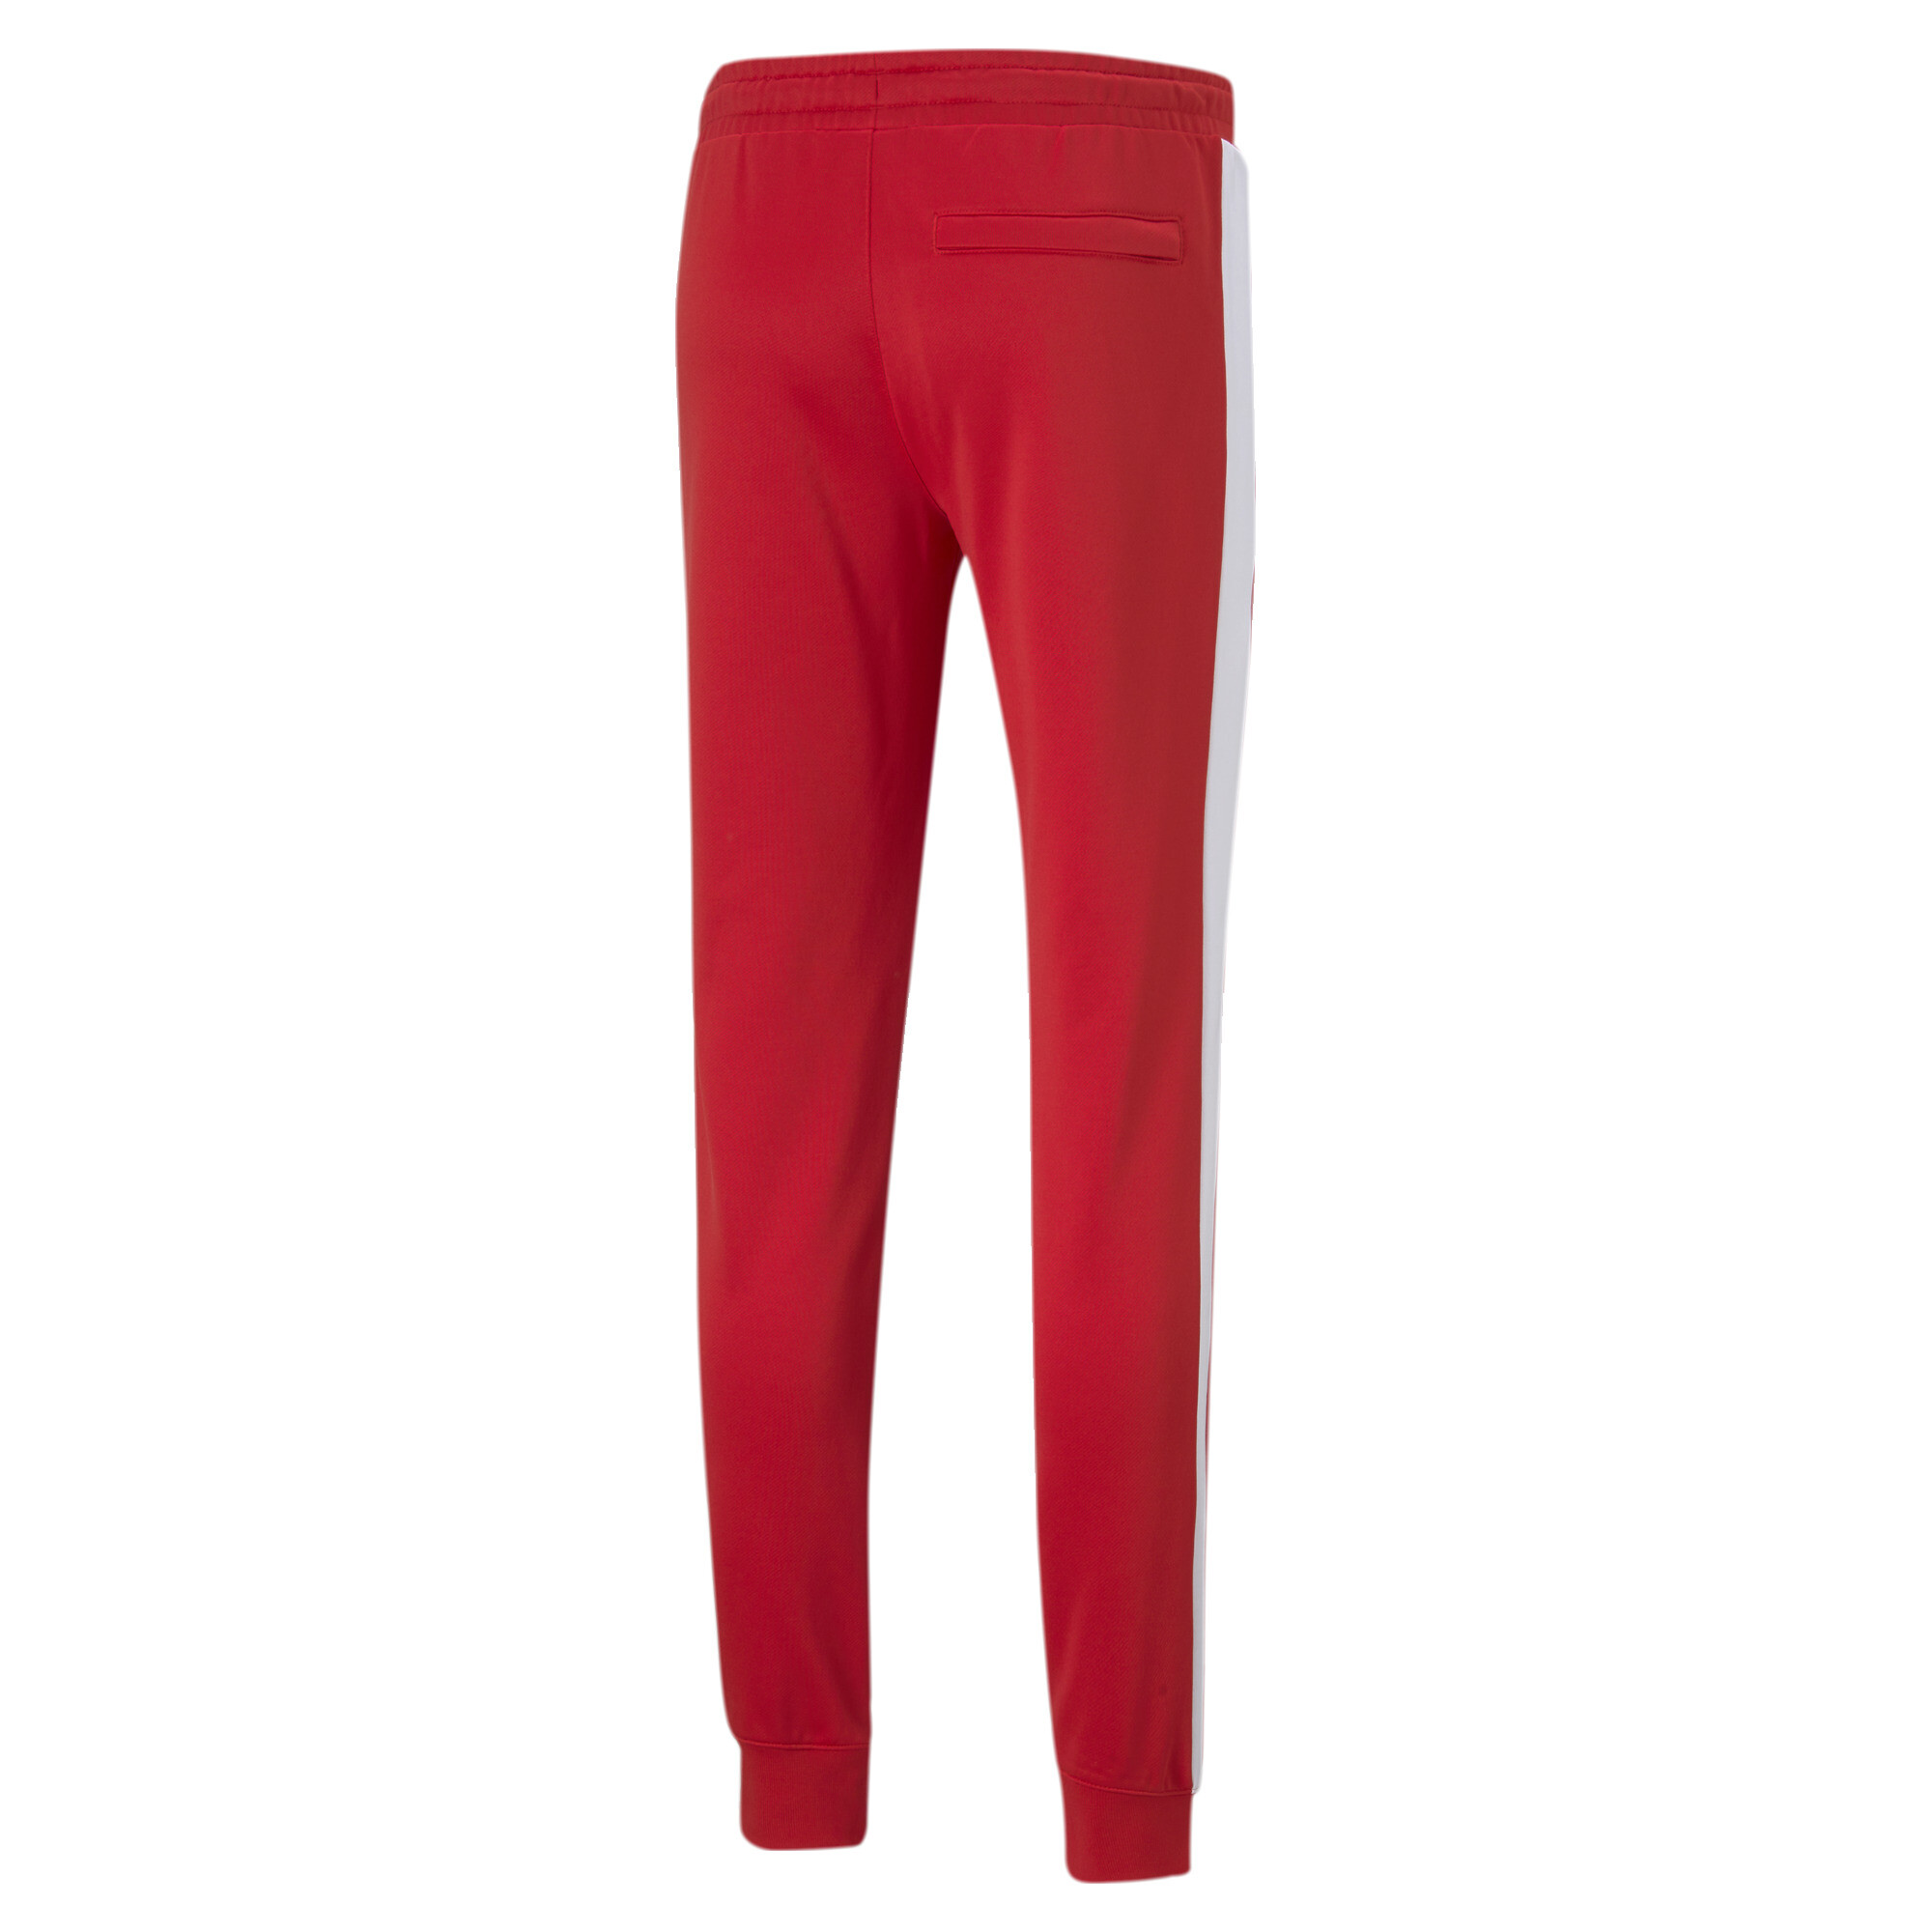 Men's PUMA Iconic T7 Track Pants In Red, Size 2XL